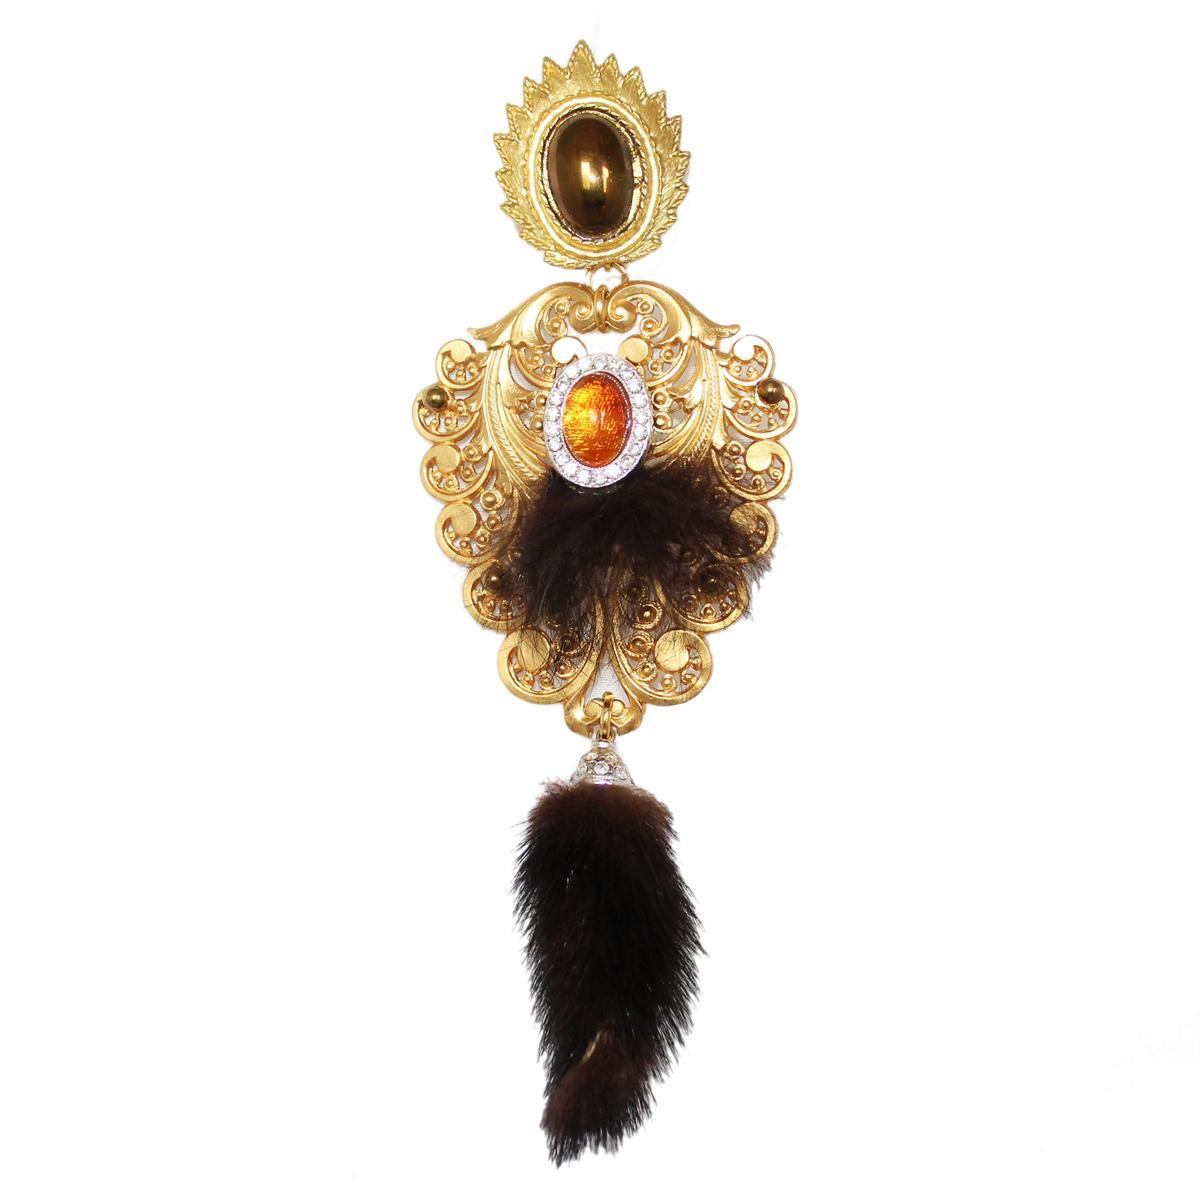 Chic and cool Carlo Zini bijoux earrings
One of the world's best bijoux designers
2018 Autumn collection
Non allergenic rhodium, 18 KT gold dipped 
Real mink tails and inserts
Swarovski crystals and resins
Clip on closure, pierced on request
100%